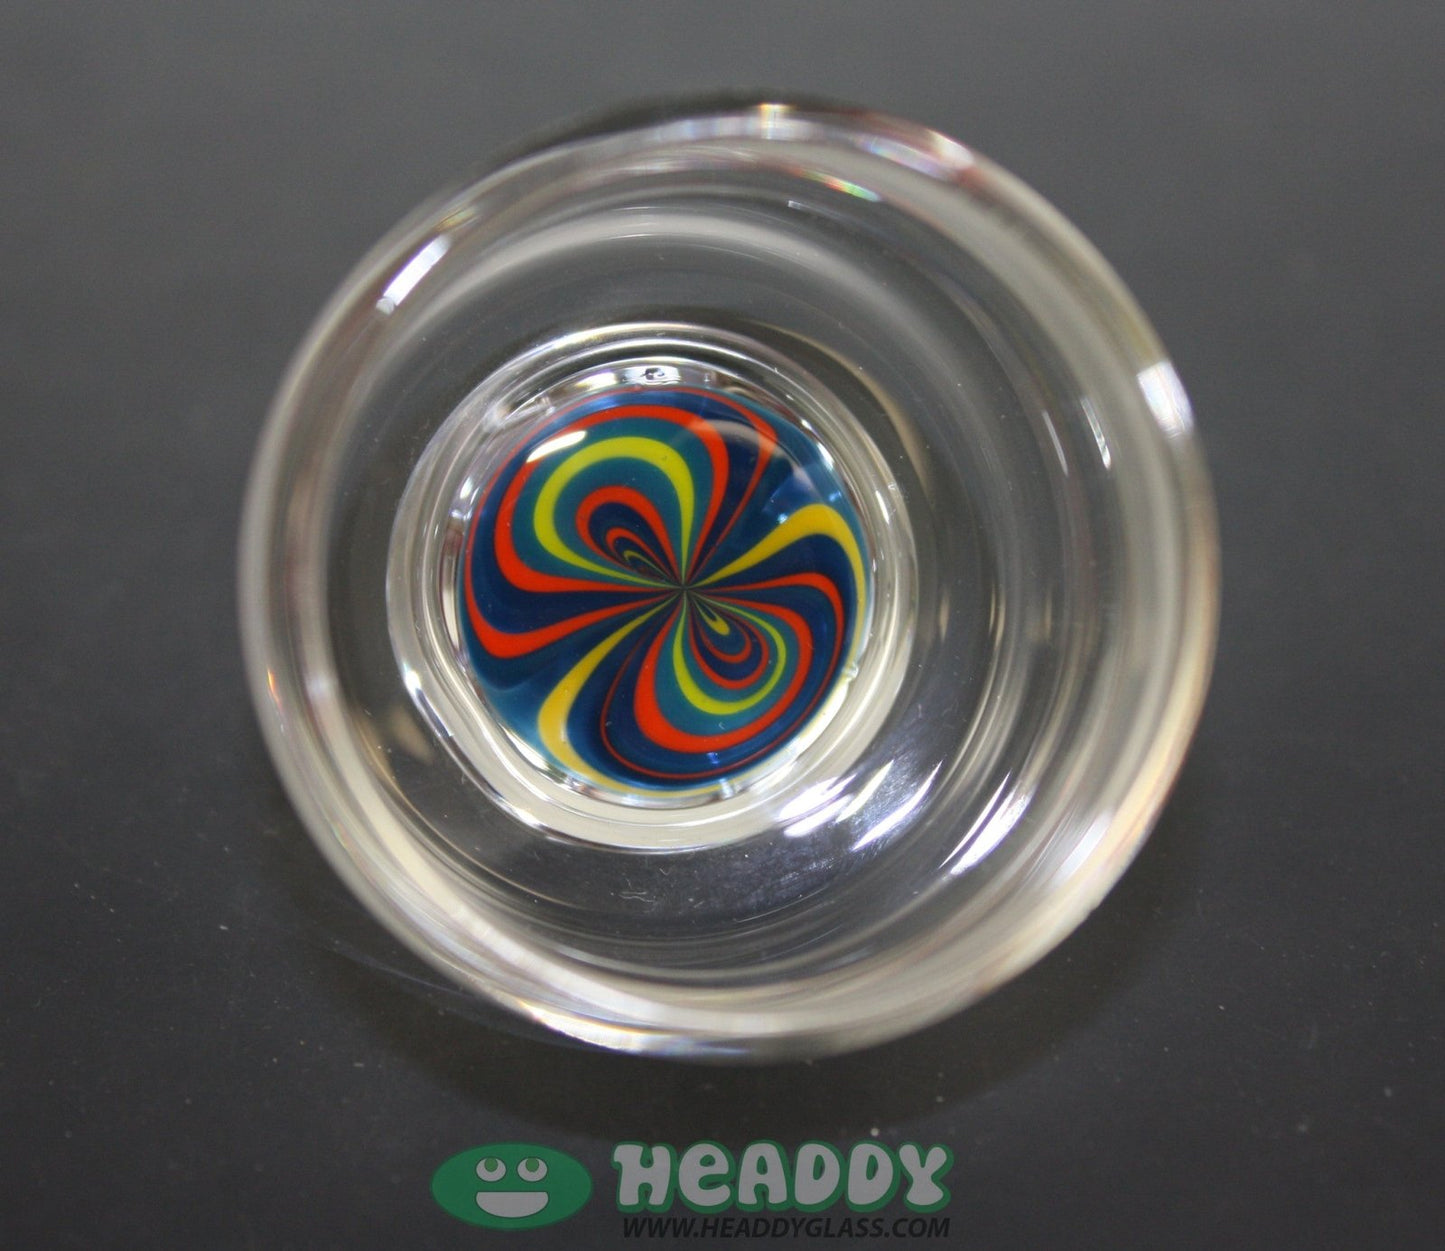 Andy G jar w/ faceted top QTIP holder - Headdy Glass - HG